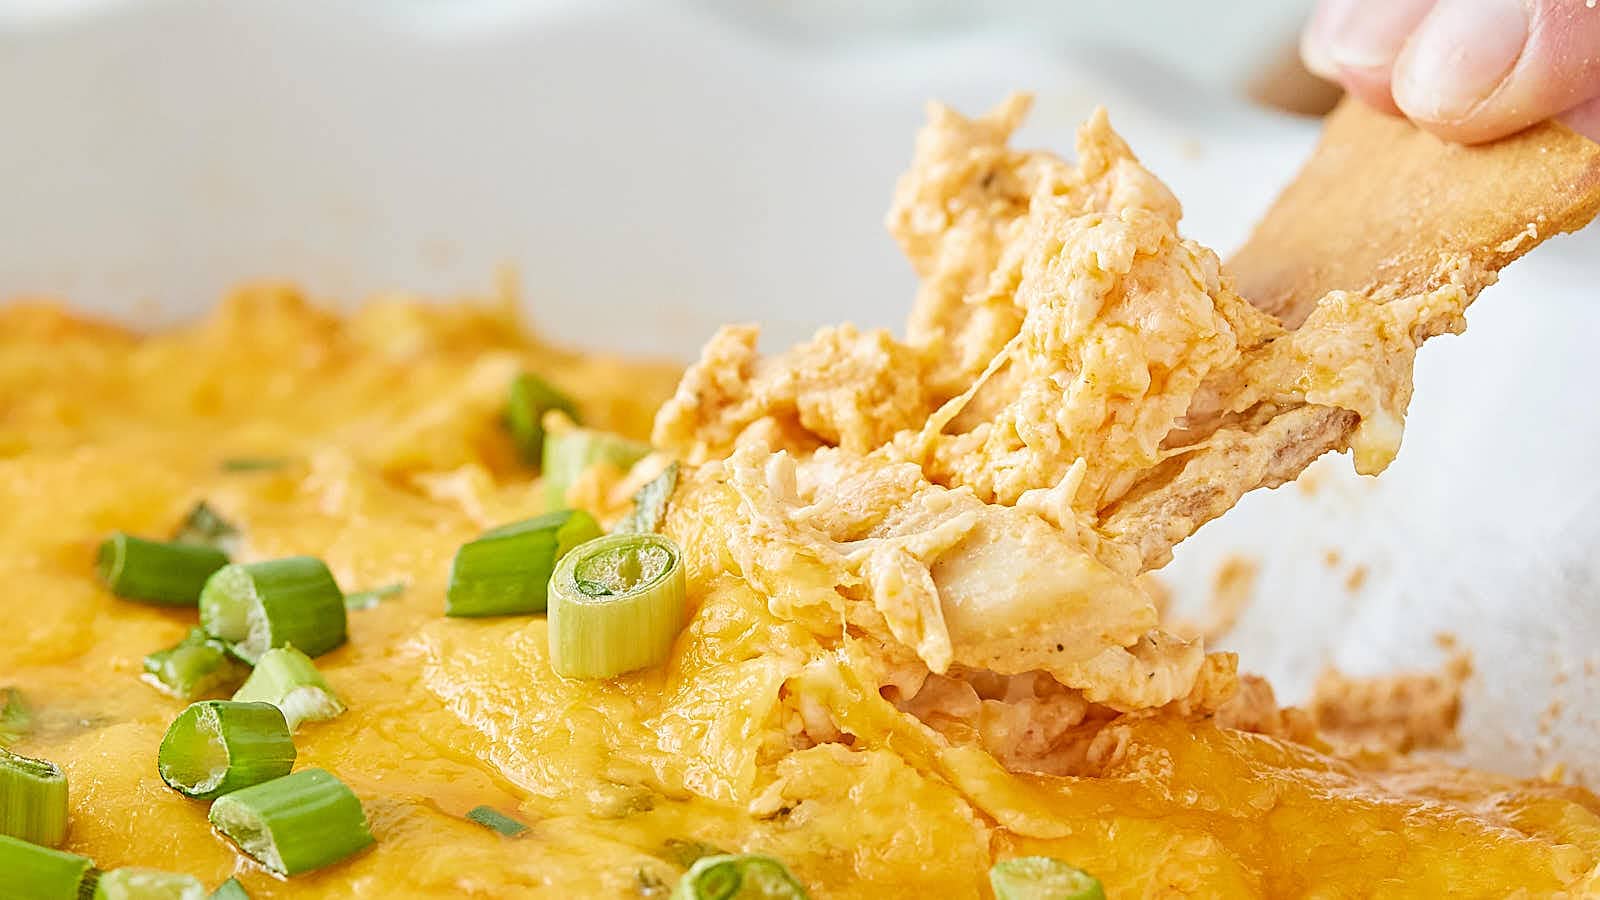 Buffalo Chicken Dip recipe by Cheerful Cook.